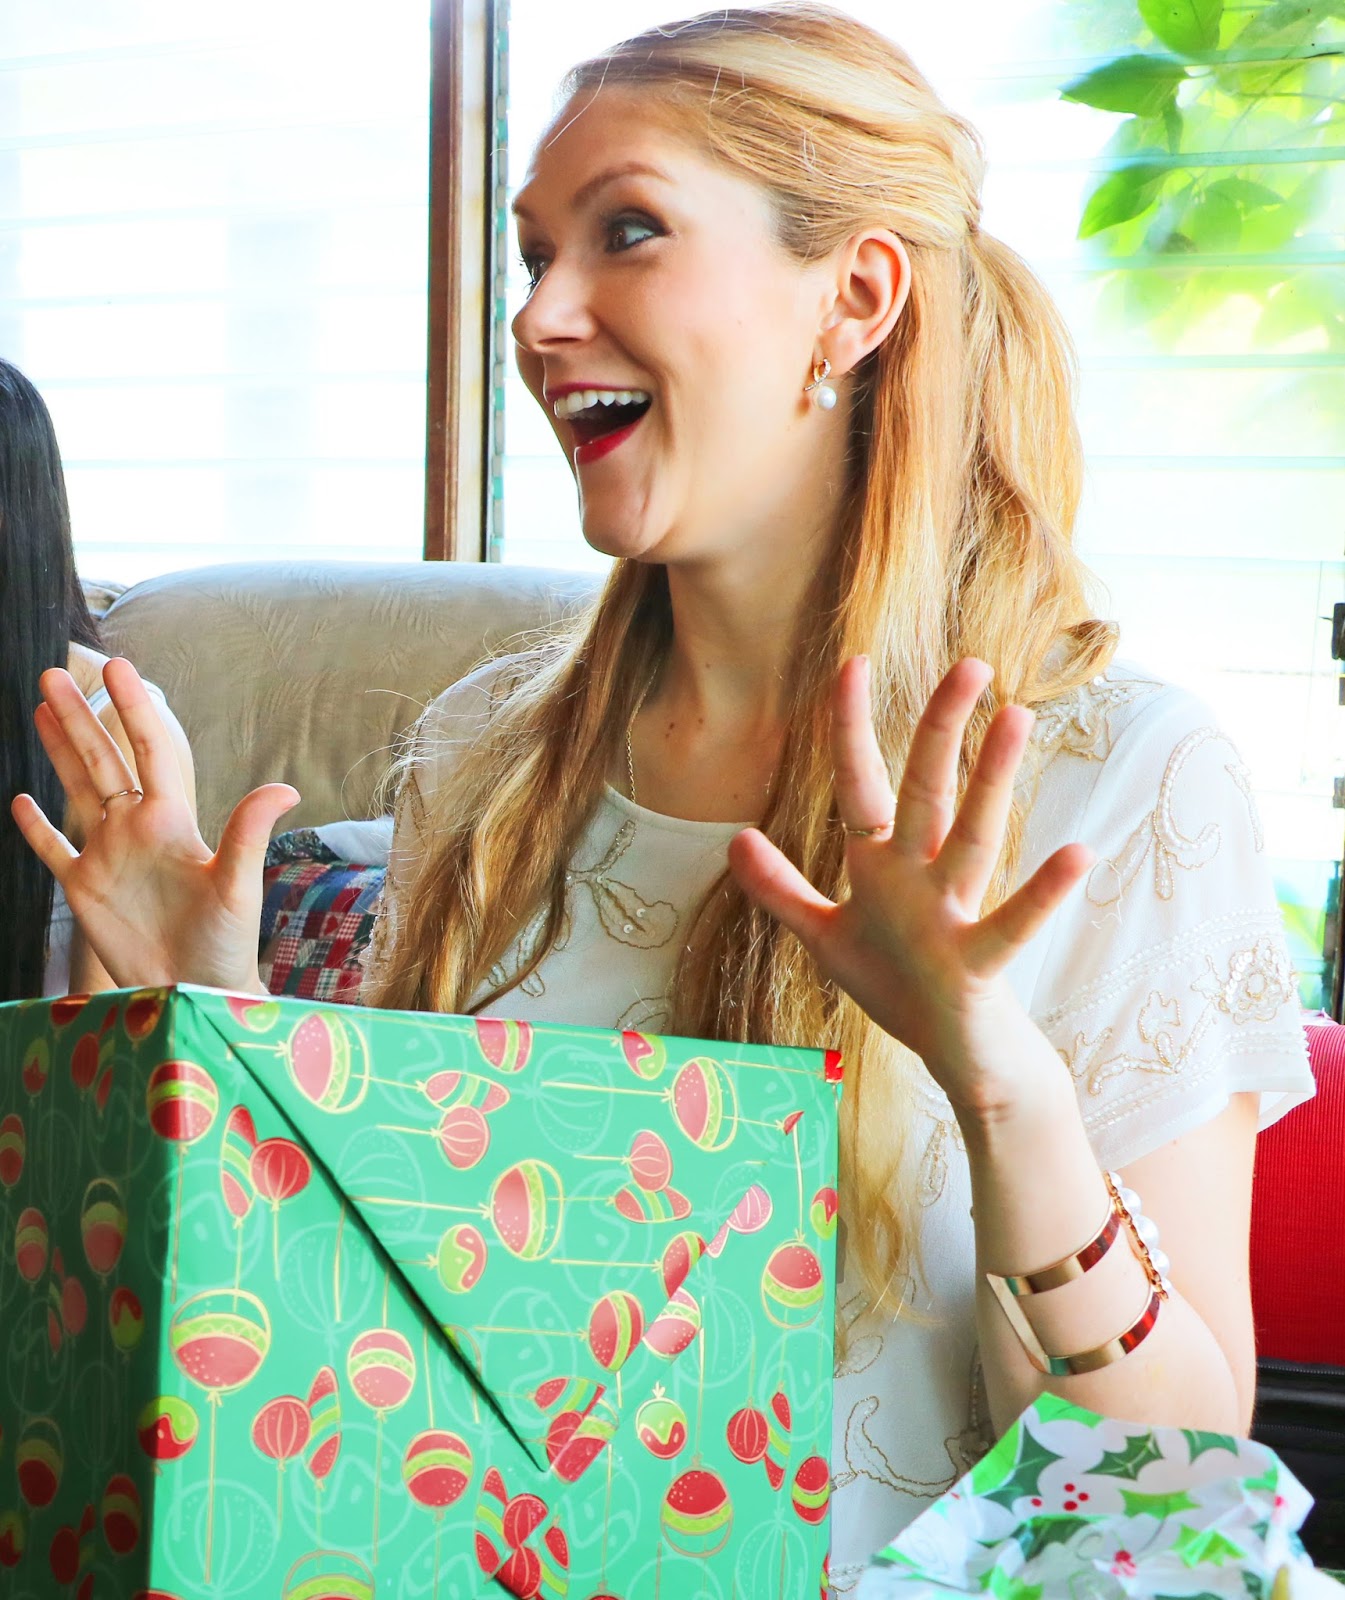 The happiness of opening Christmas presents!